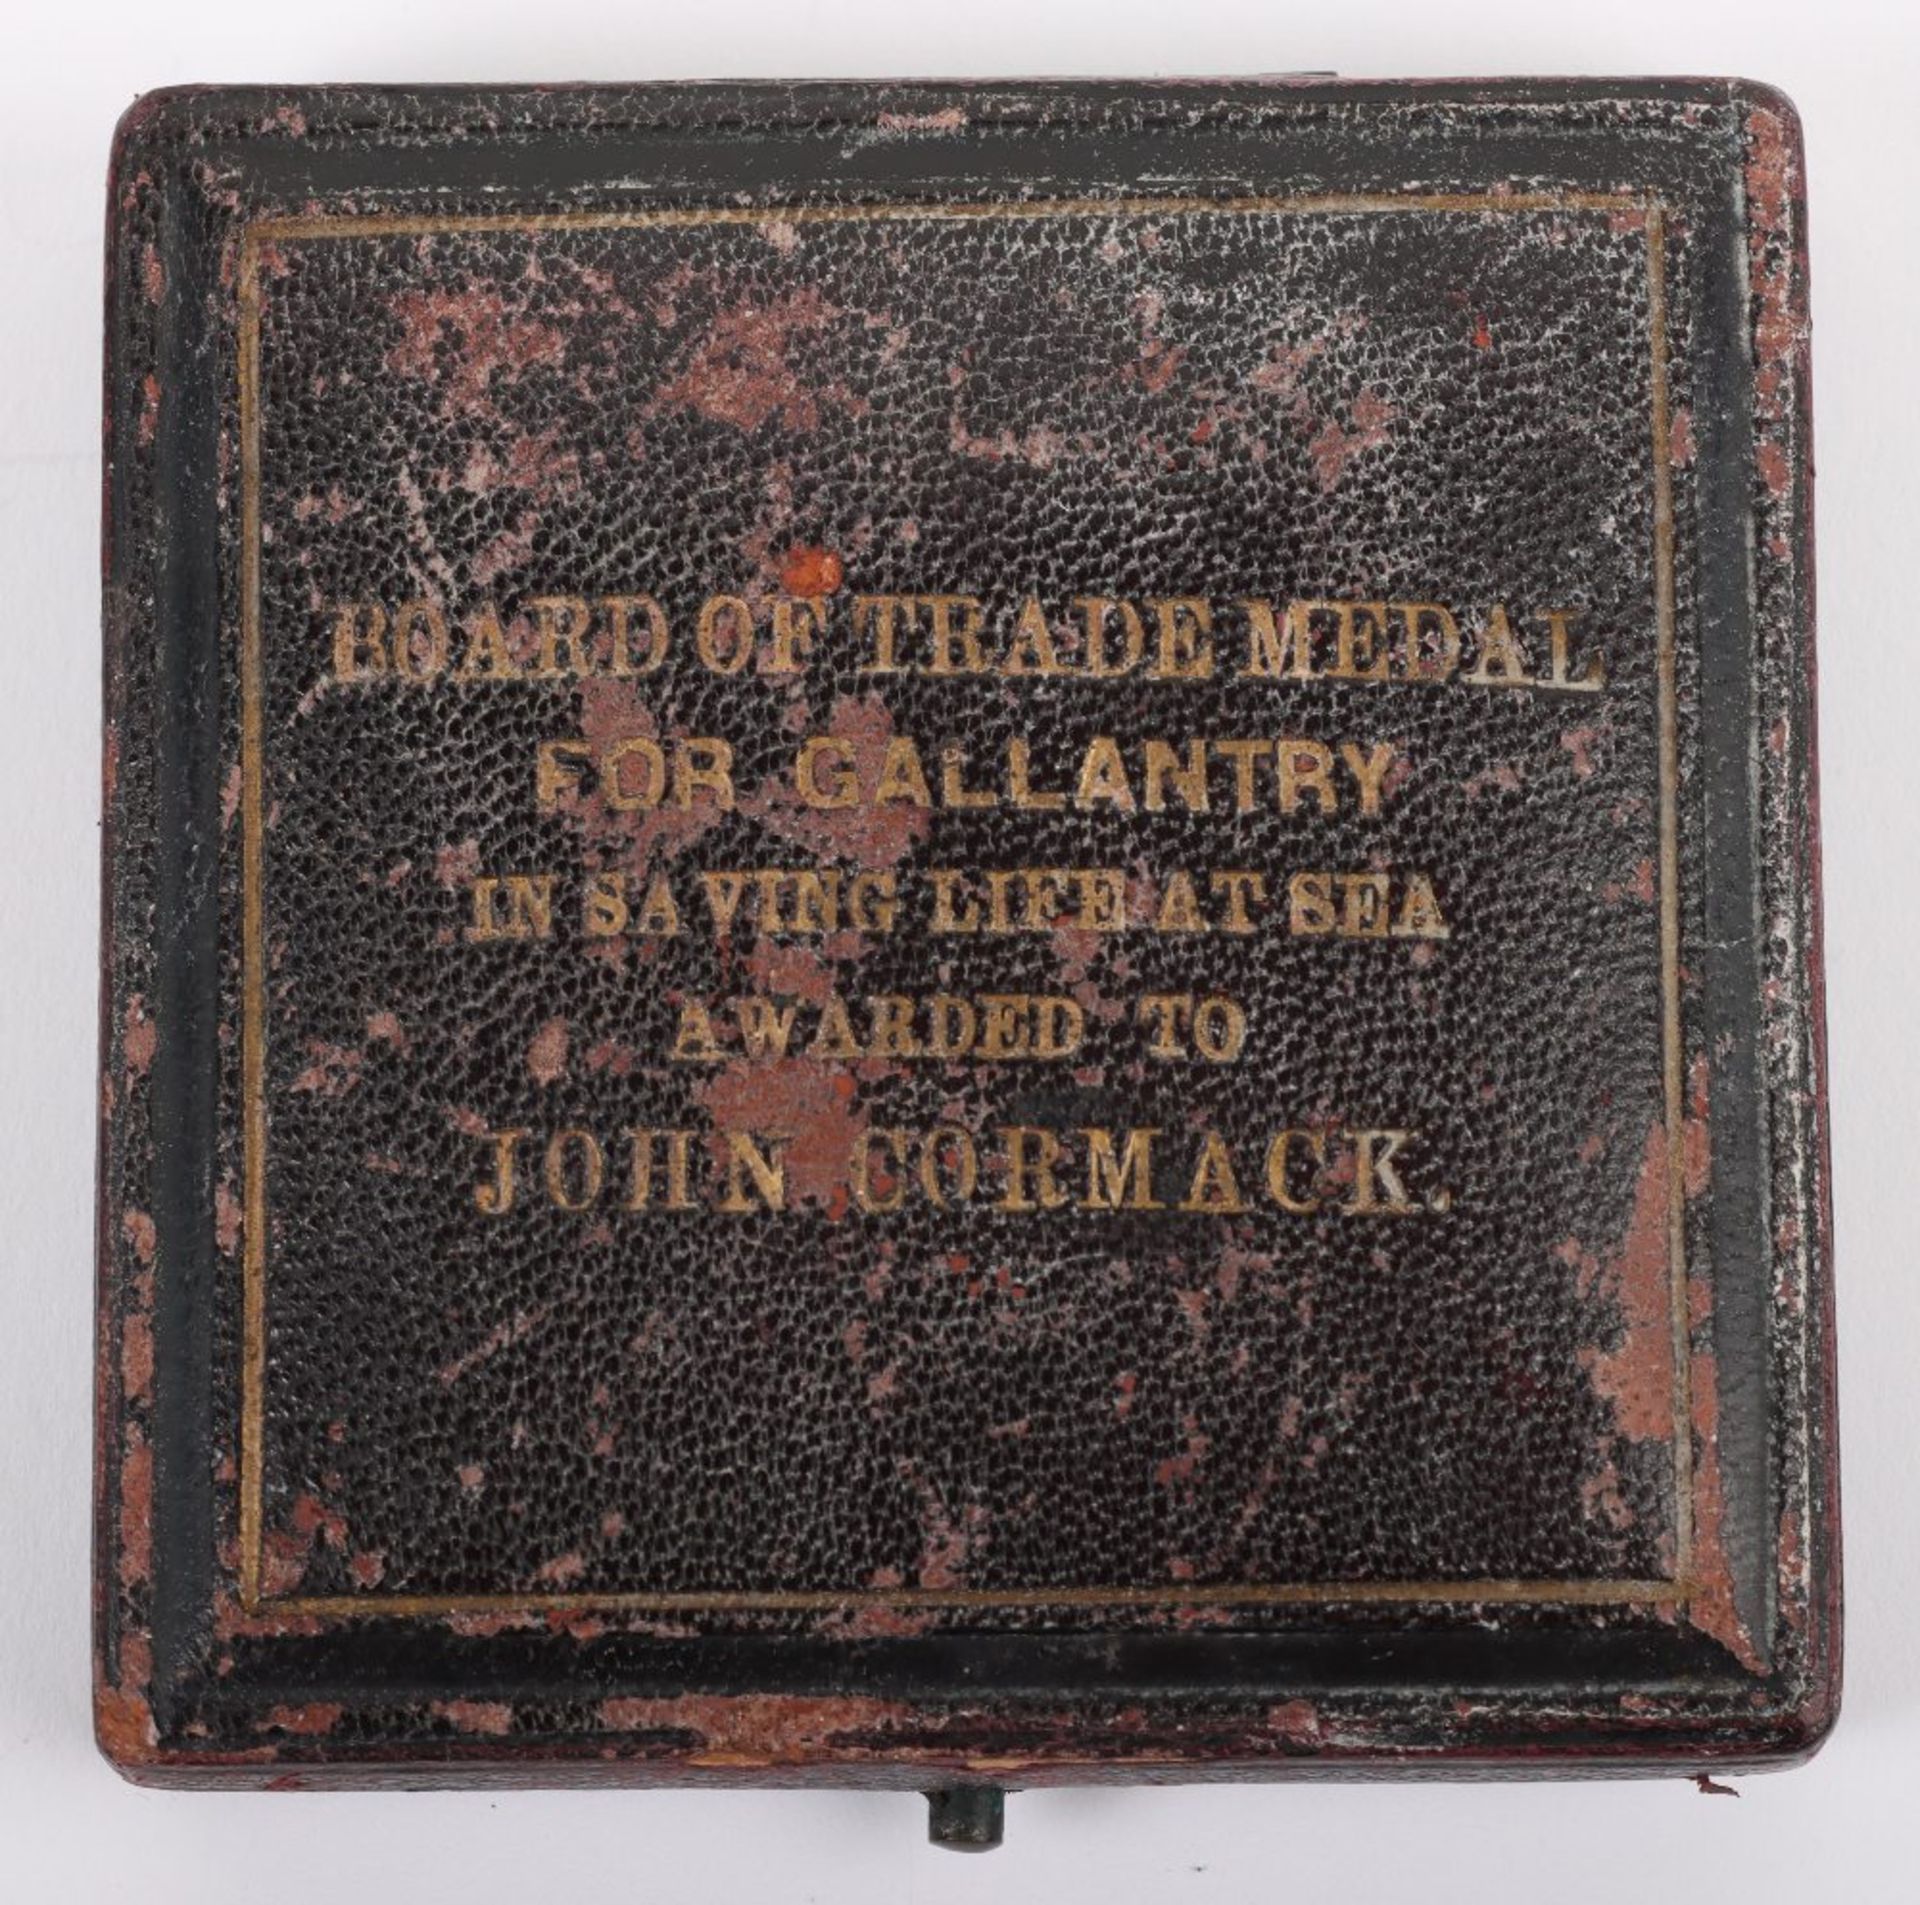 Board of Trade Medal for Gallantry in Saving Life at Sea Awarded to the Master of a Fishing Boat for - Image 2 of 9